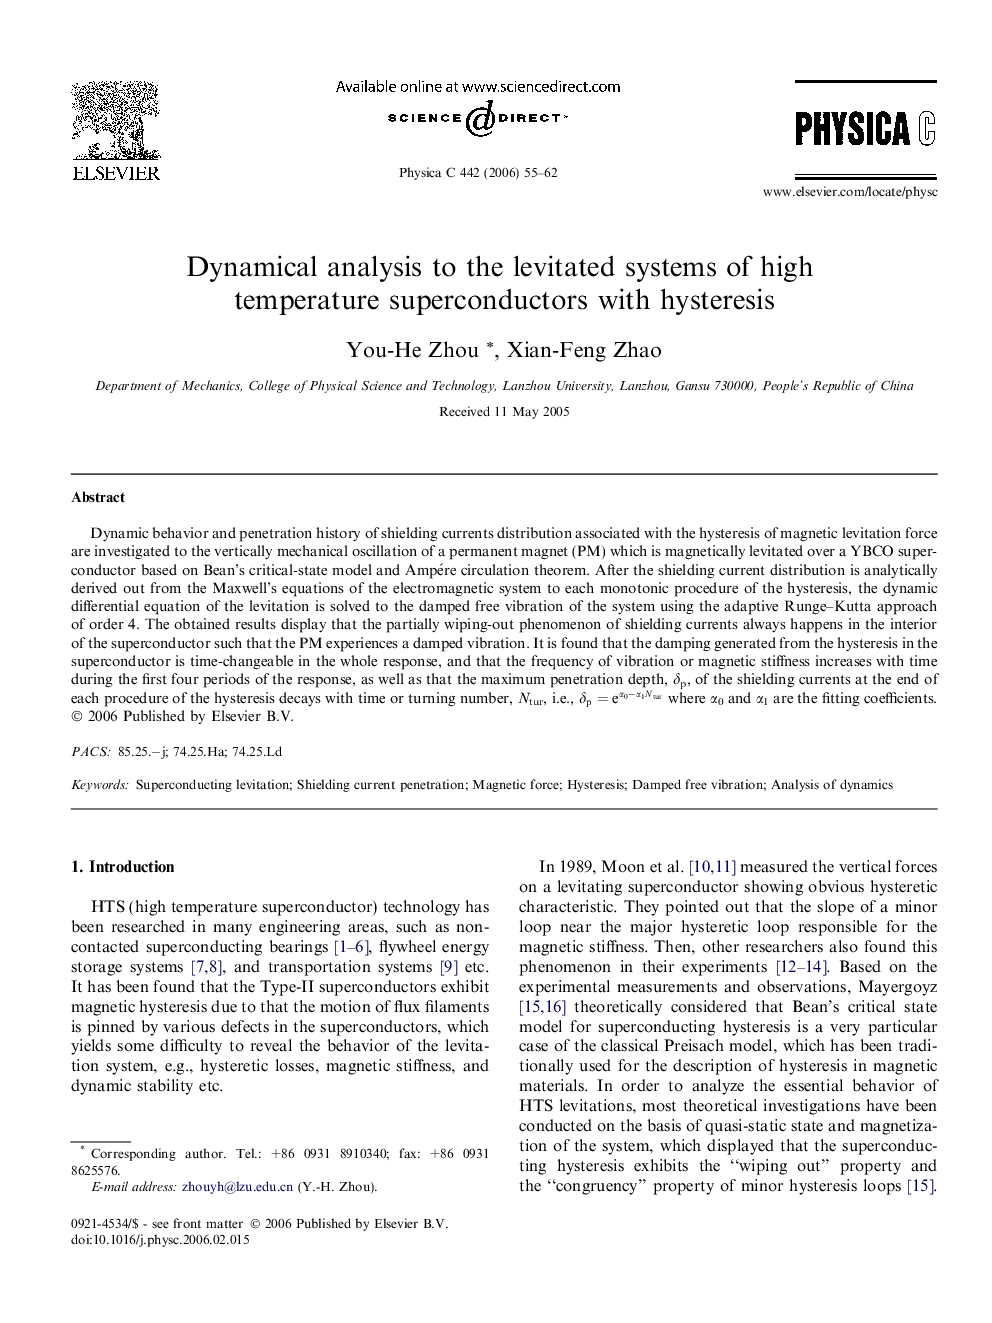 Dynamical analysis to the levitated systems of high temperature superconductors with hysteresis